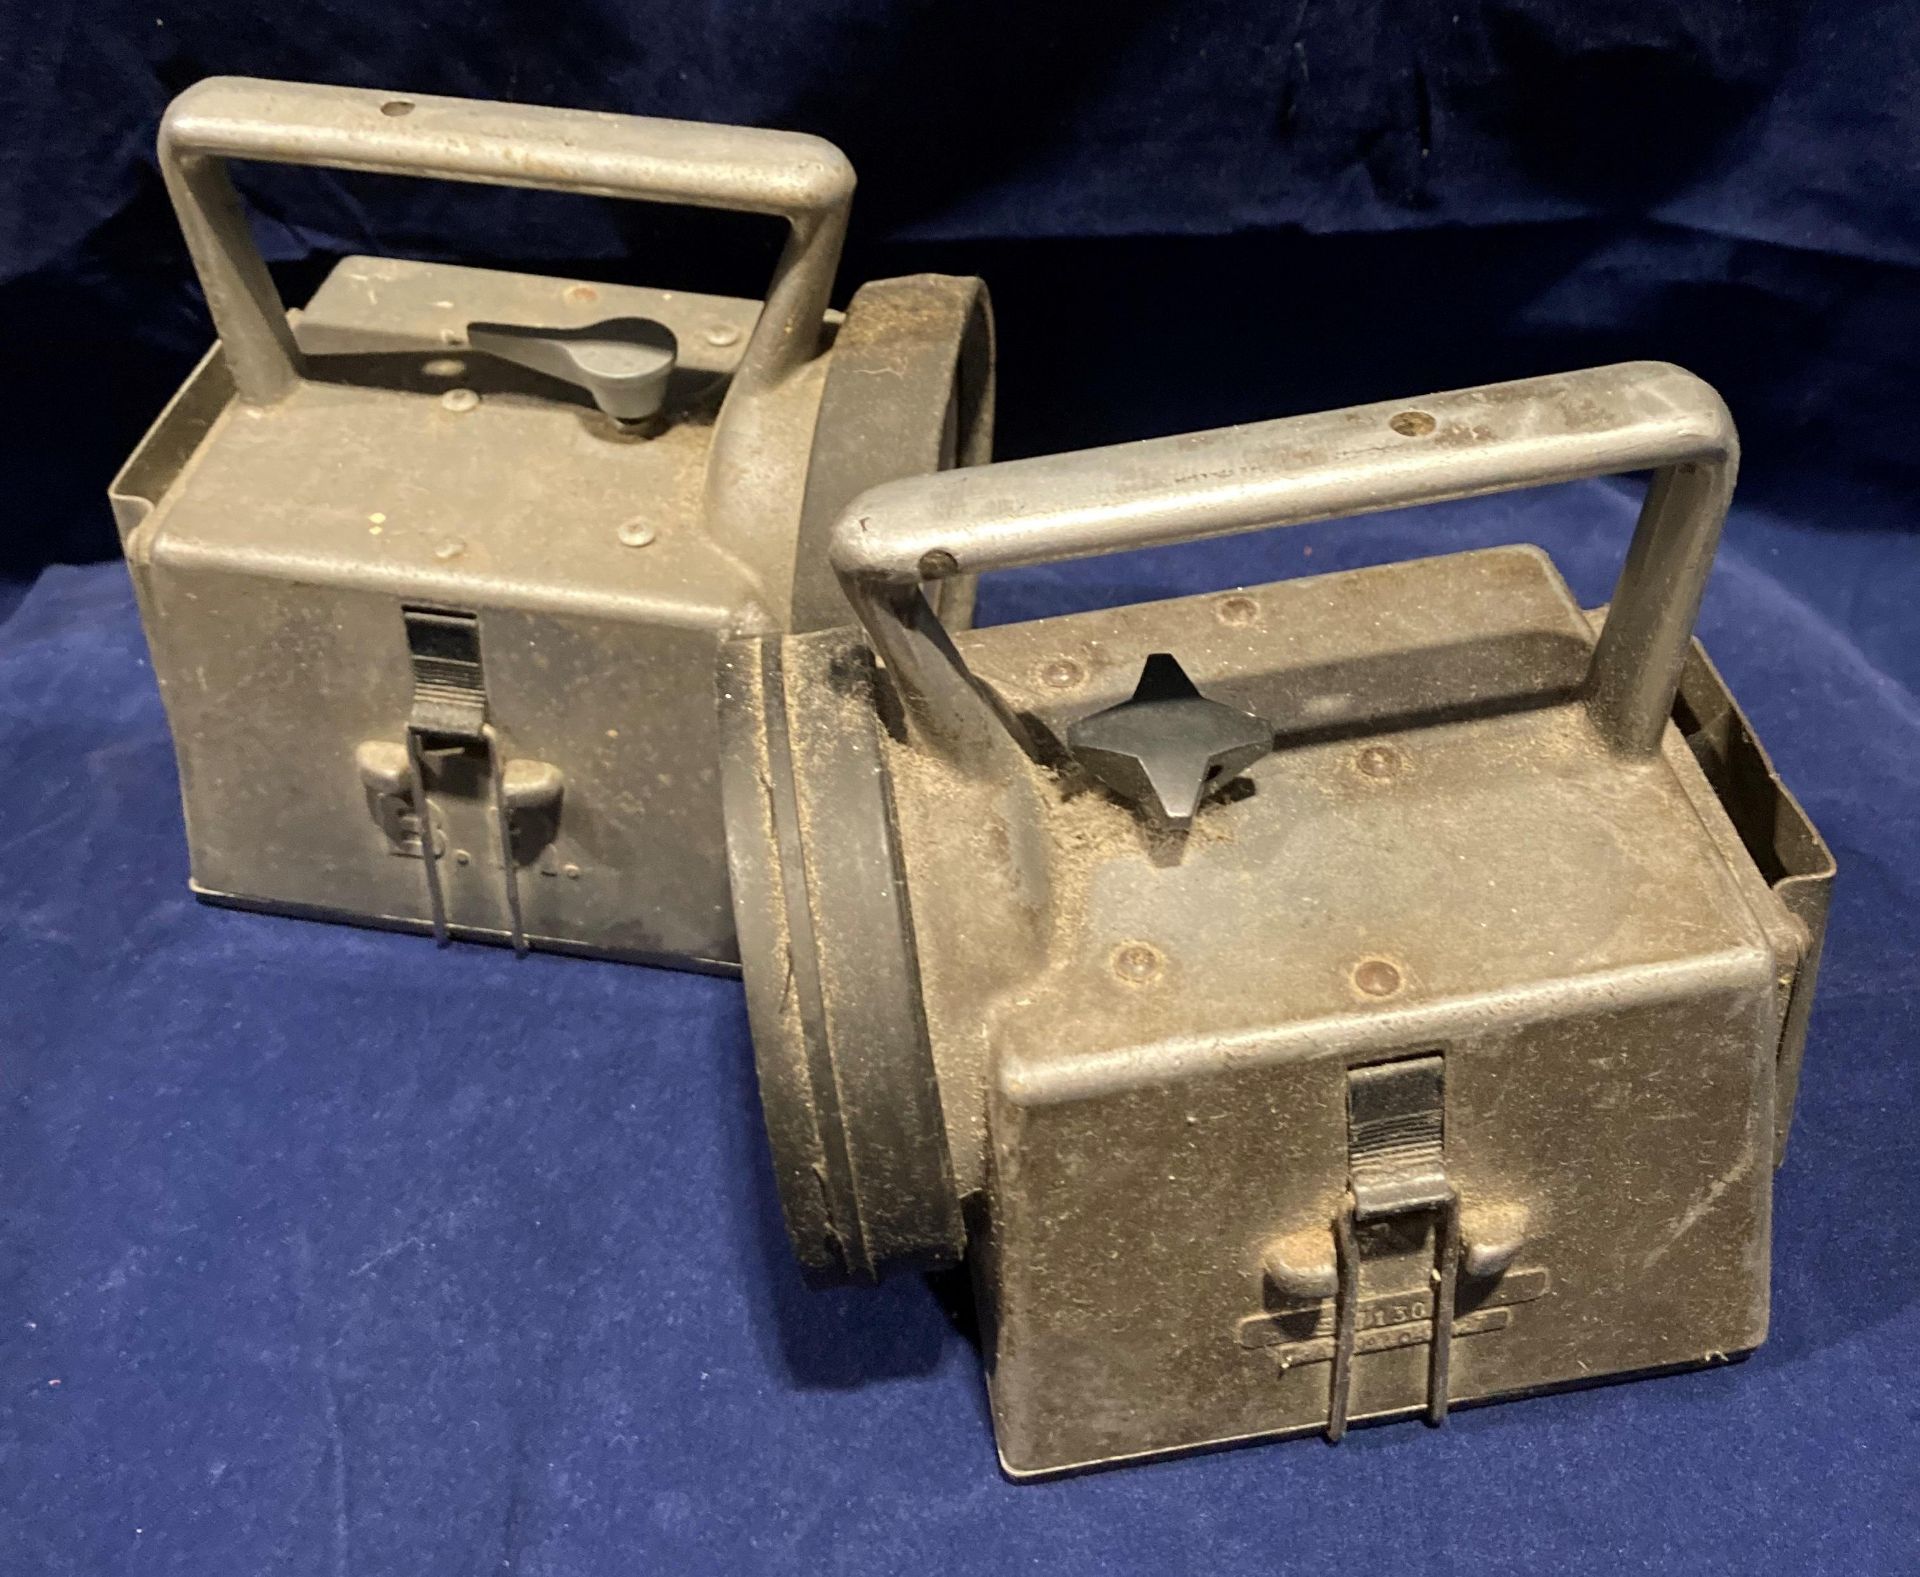 Two Bardic Ltd Southampton railwaymen's torches (Saleroom location: S2 Counter Cabinets LHS) - Image 2 of 3